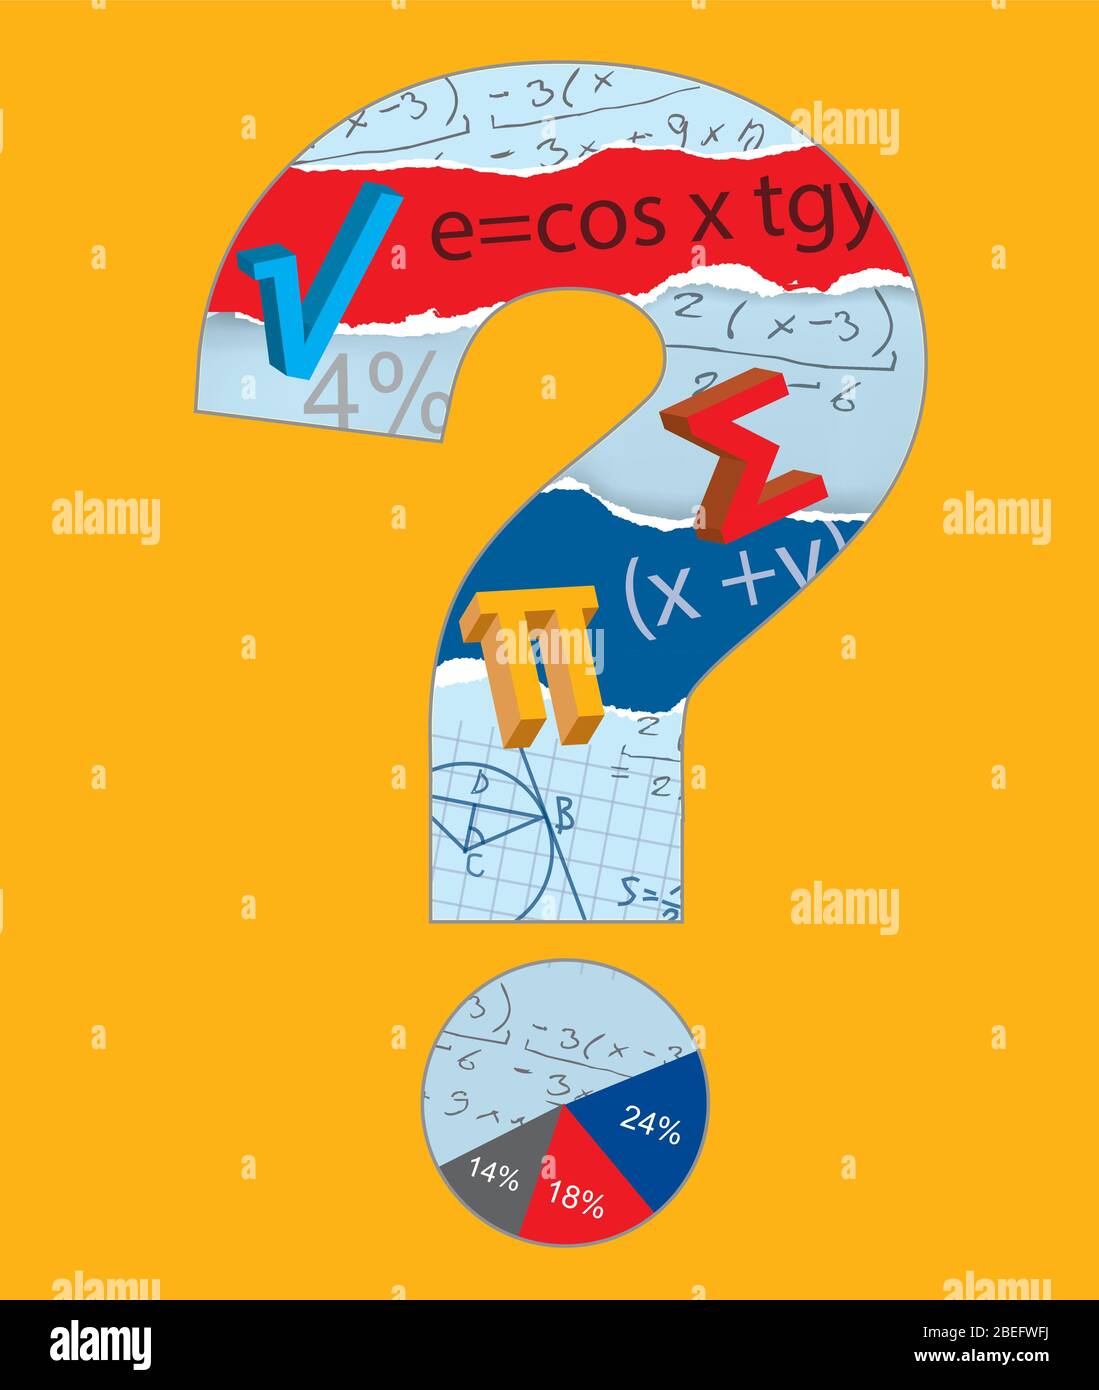 Mathematics, question mark. Illustration of Mmathematical symbols inside the question mark on the orange background. Vector available. Stock Vector